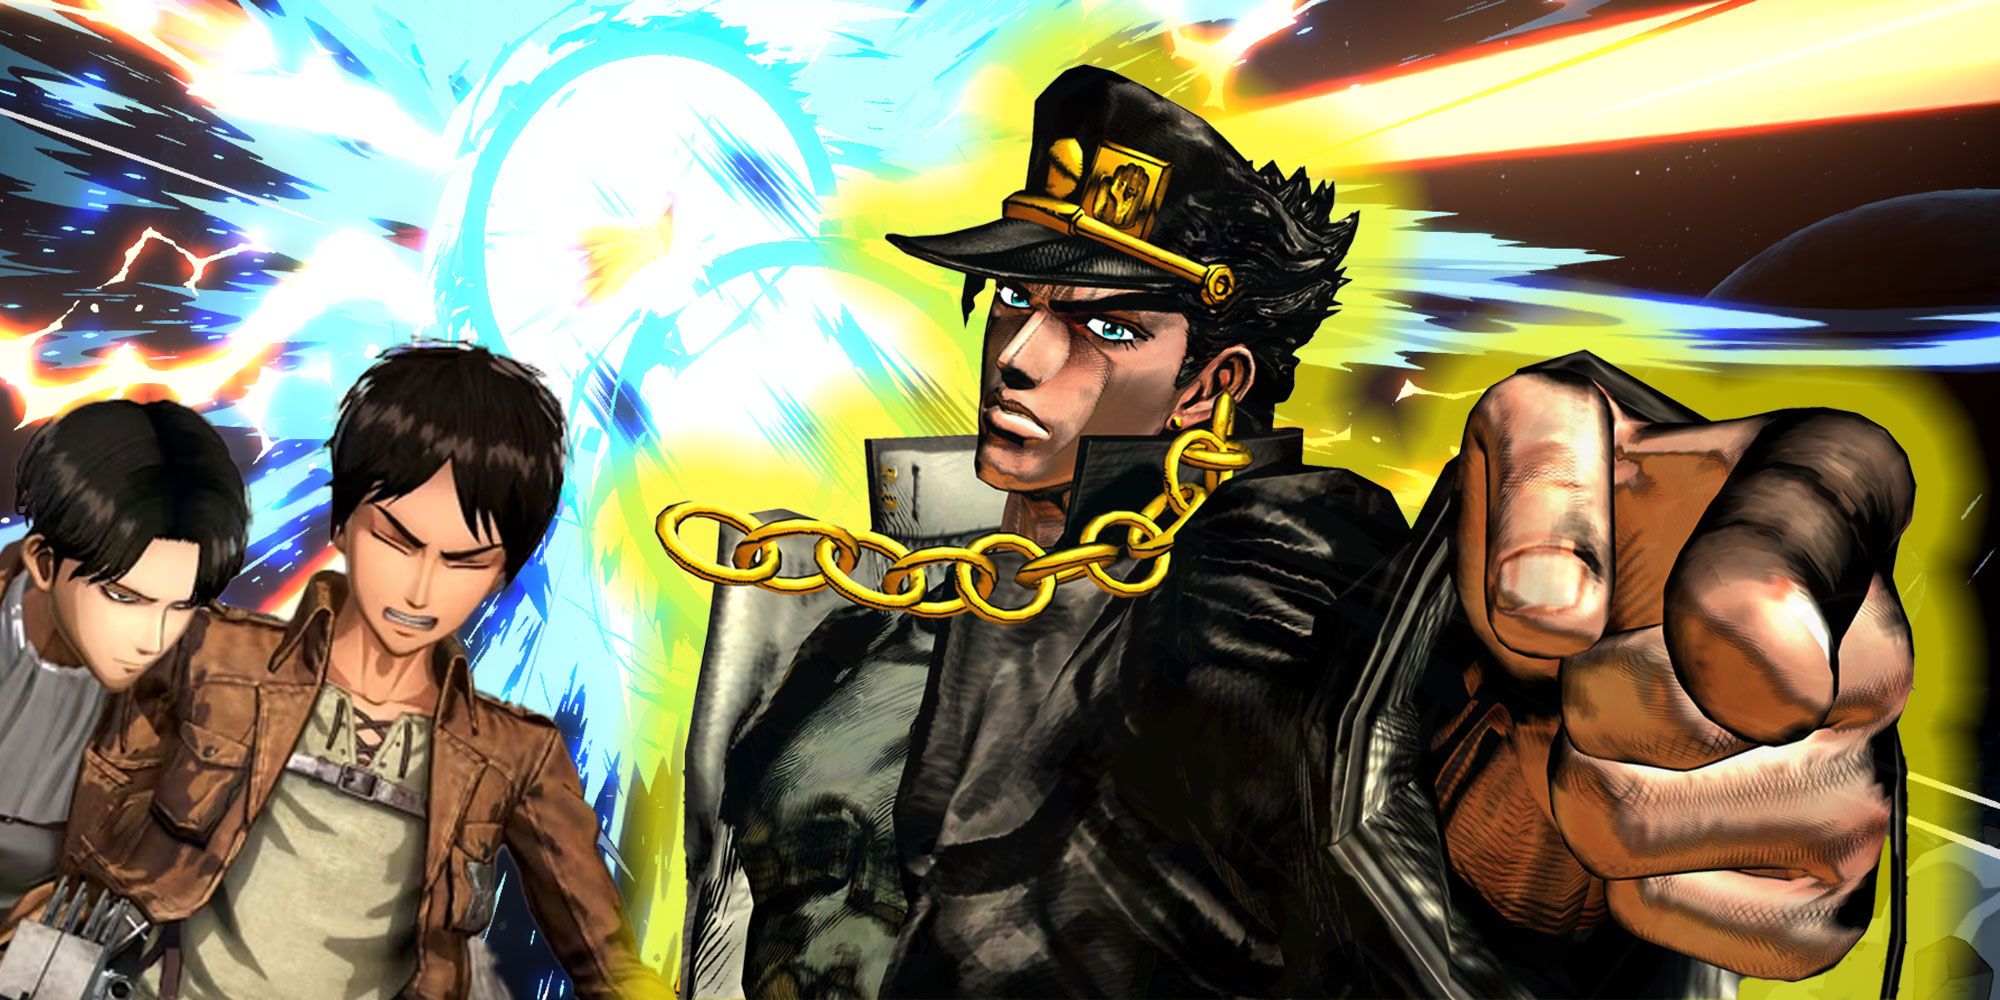 Jo Jo's Bizarre adventure image with stylized background of yellow and blue.